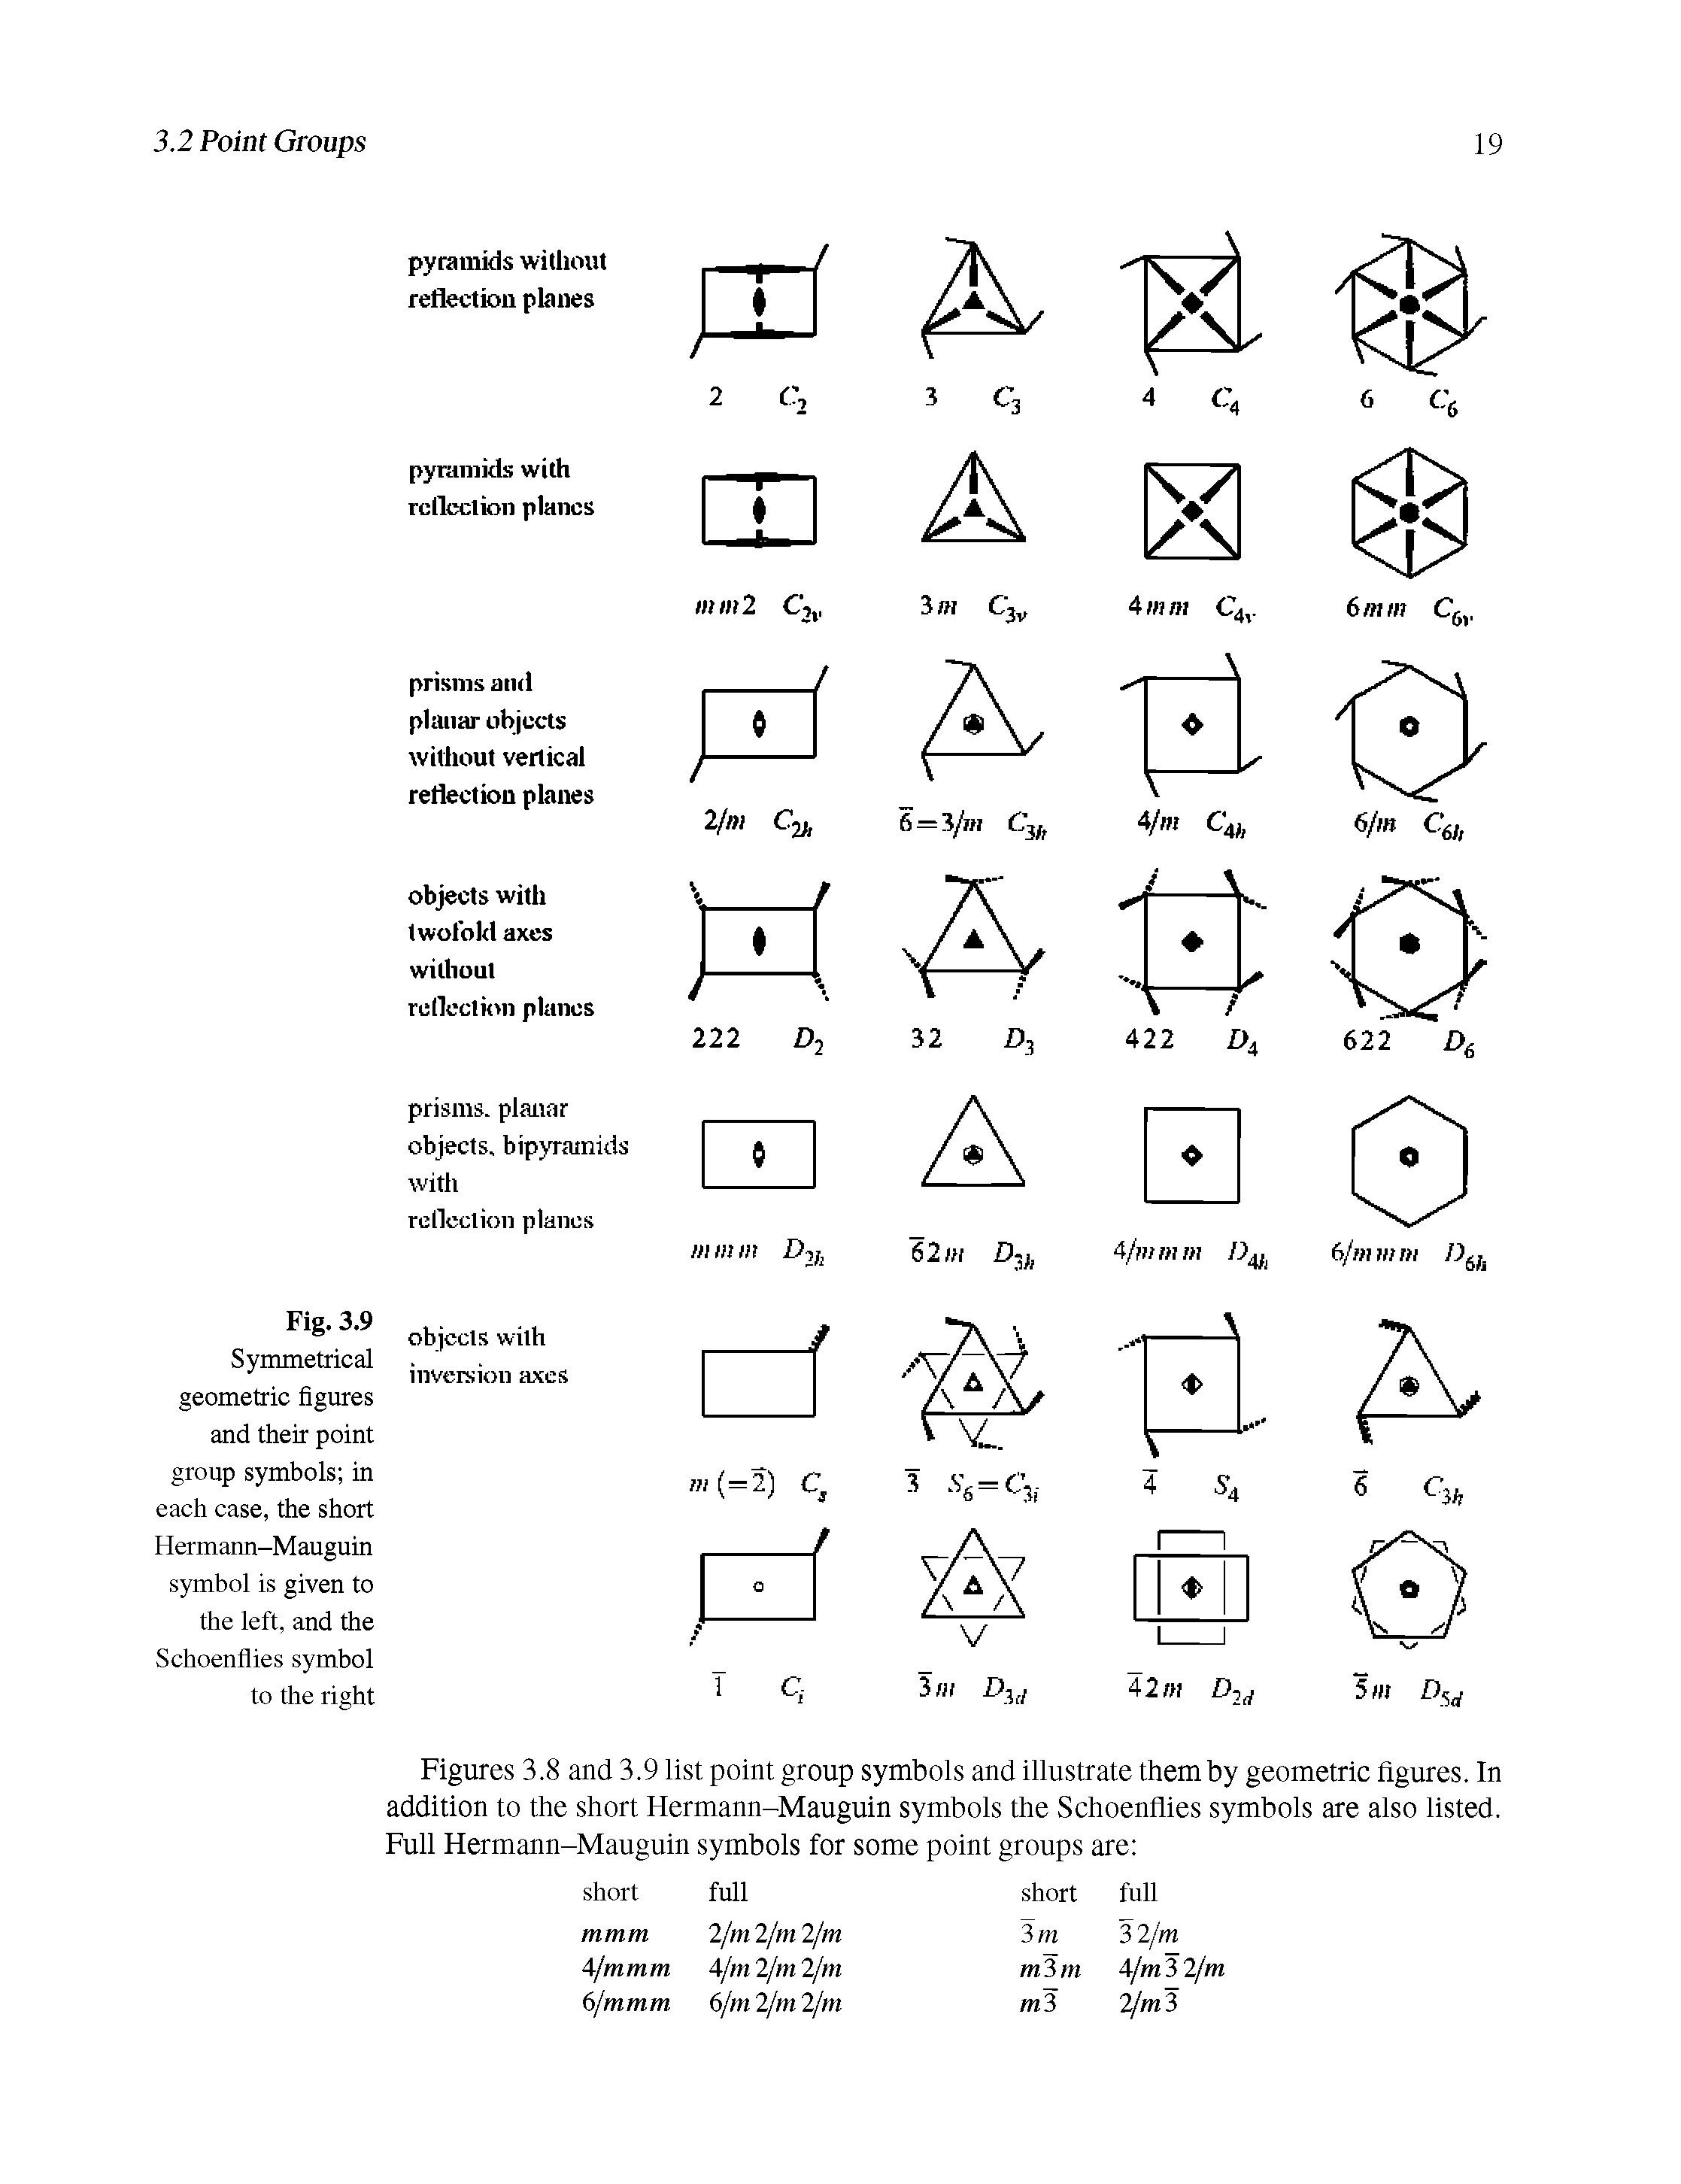 Figures 3.8 and 3.9 list point group symbols and illustrate them by geometric figures. In addition to the short Hermann-Mauguin symbols the Schoenflies symbols are also listed. Full Hermann-Mauguin symbols for some point groups are ...